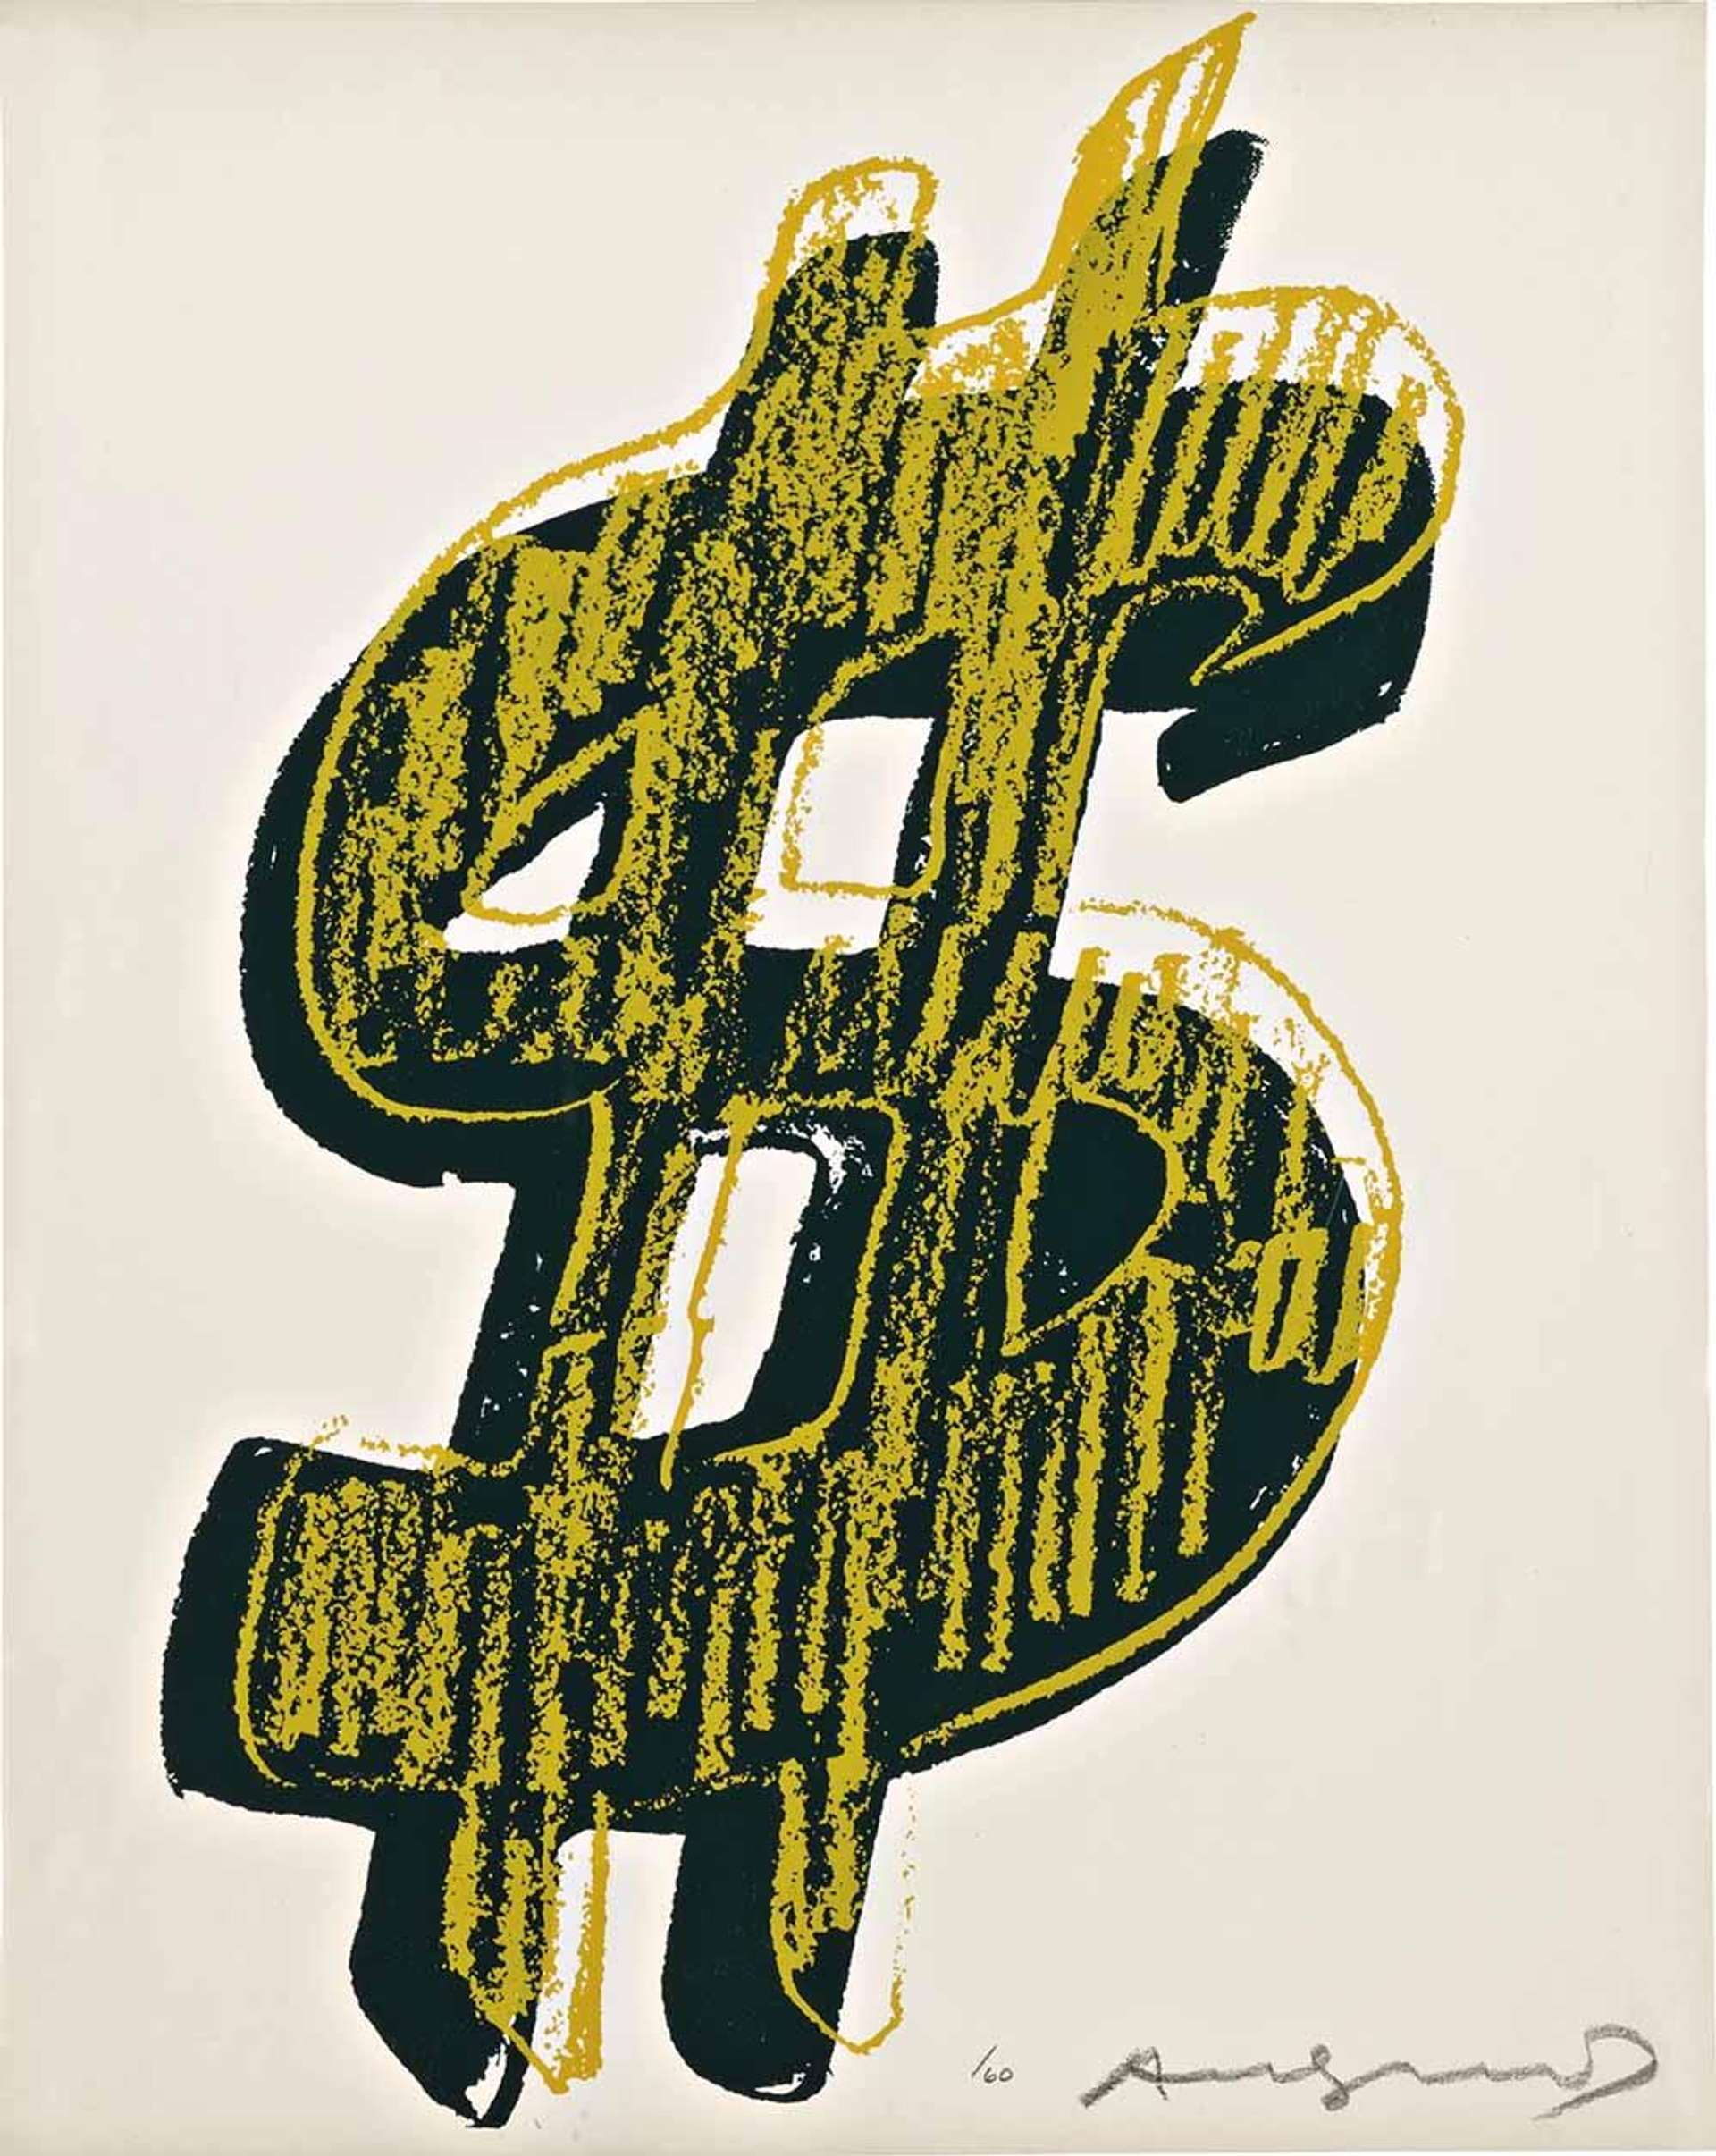 An image of the print Dollar (F. & S. II.278) by Andy Warhol. It shows a stylised dollar sign depicted in green and yellow against a white background.